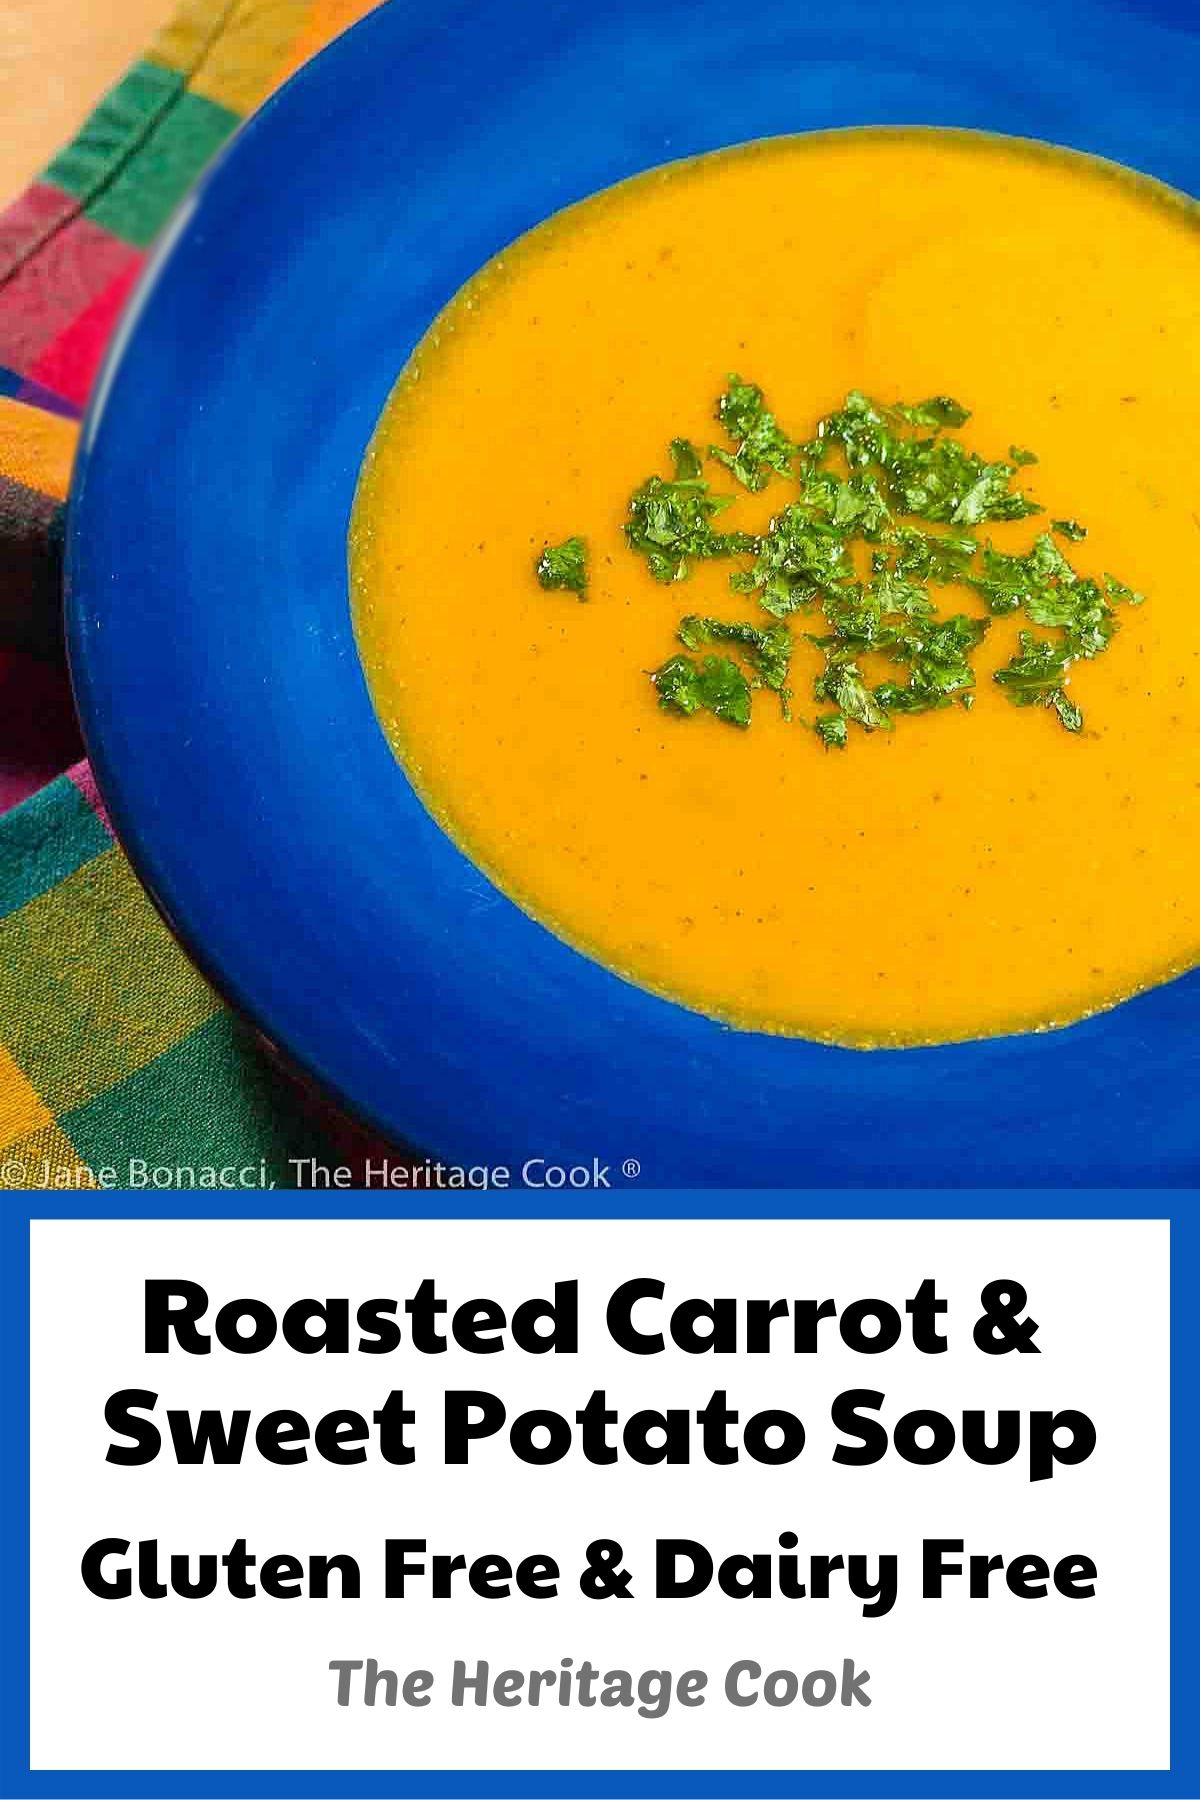 Deep orange golden soup in a dark blue bowl on a multicolored cloth with green chopped herbs on top. Enjoy this Roasted Carrot Sweet Potato Soup (Gluten-Free; Dairy-Free); 2024 Jane Bonacci, The Heritage Cook. 